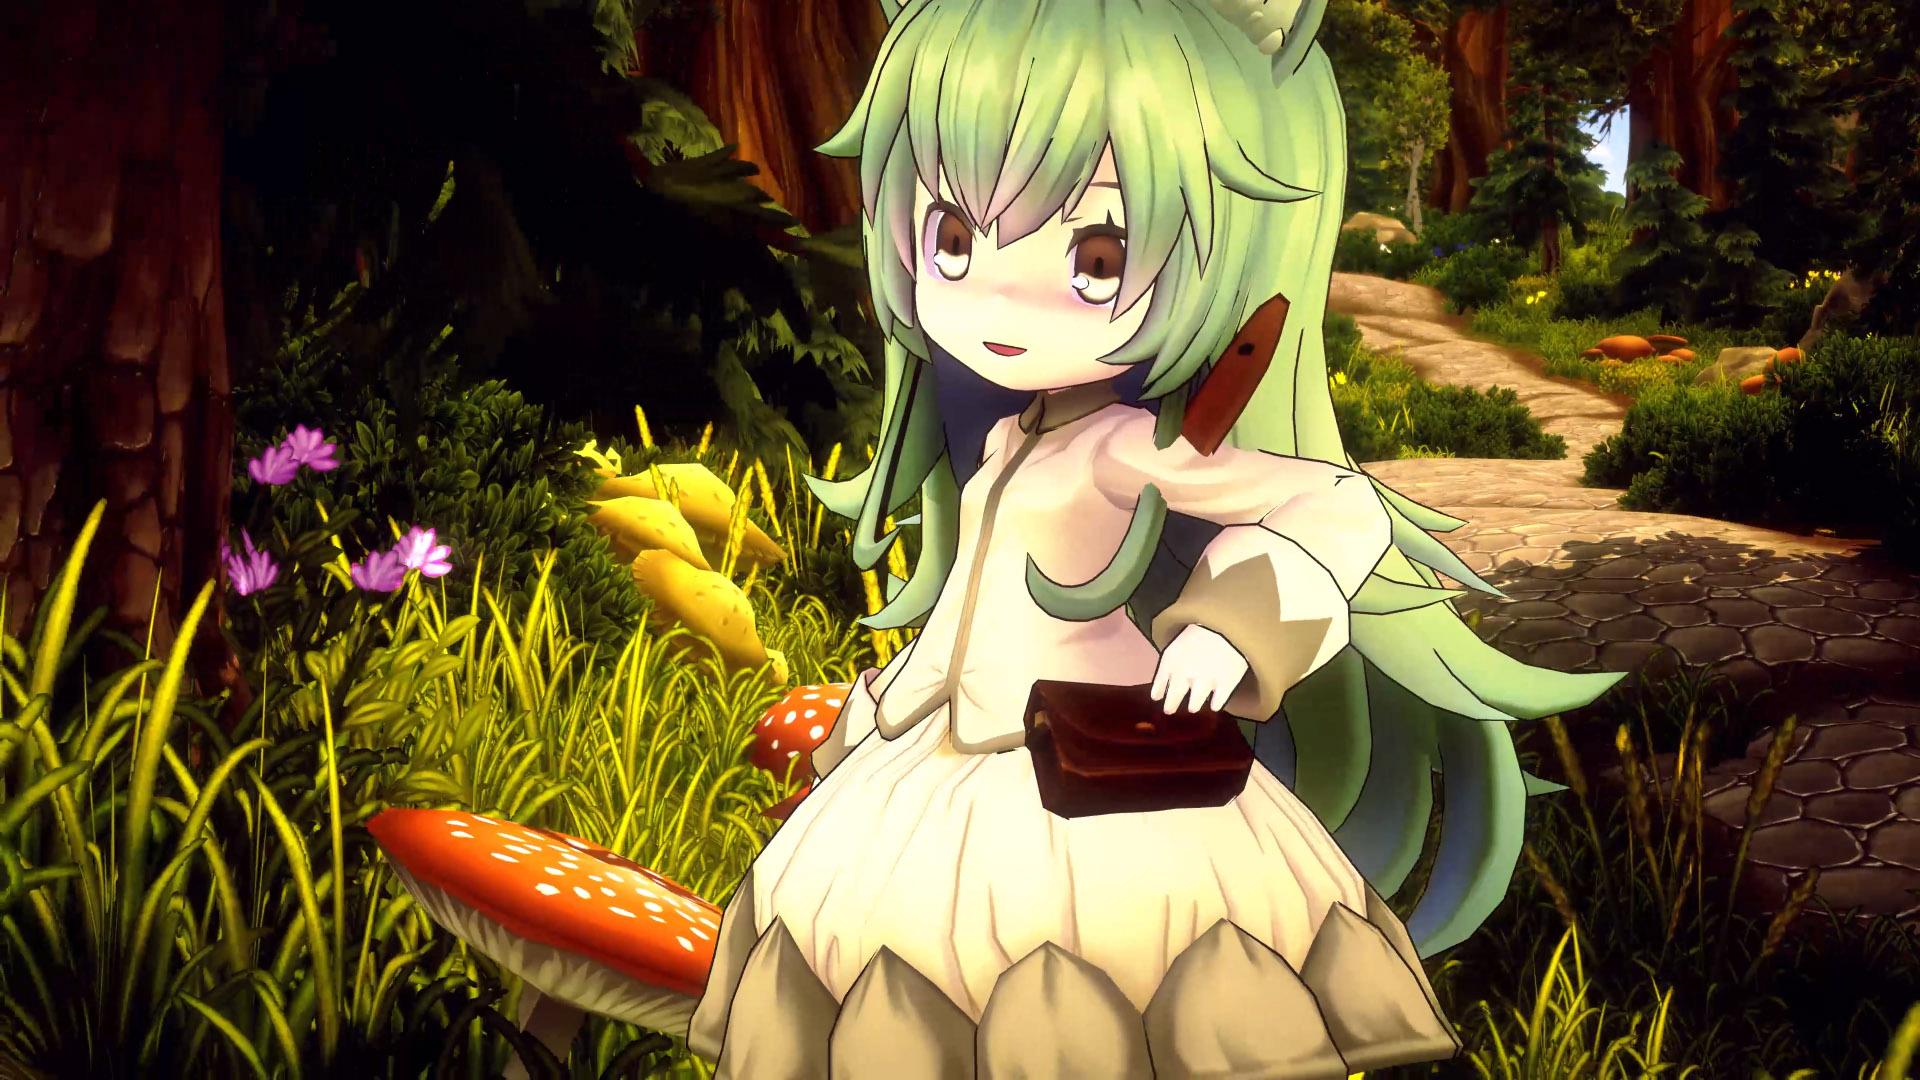 Marchen Forest: Mylne and the Forest Gift, メルヘンフォーレスト, Marchen Forest Mylne and the Forest Gift, PS4, PlayStation 4, Nintendo Switch, Switch, Limited Edition, English, Multi-language, trailer, gameplay, screenshots, figure, Clouded Leopard Entertainment